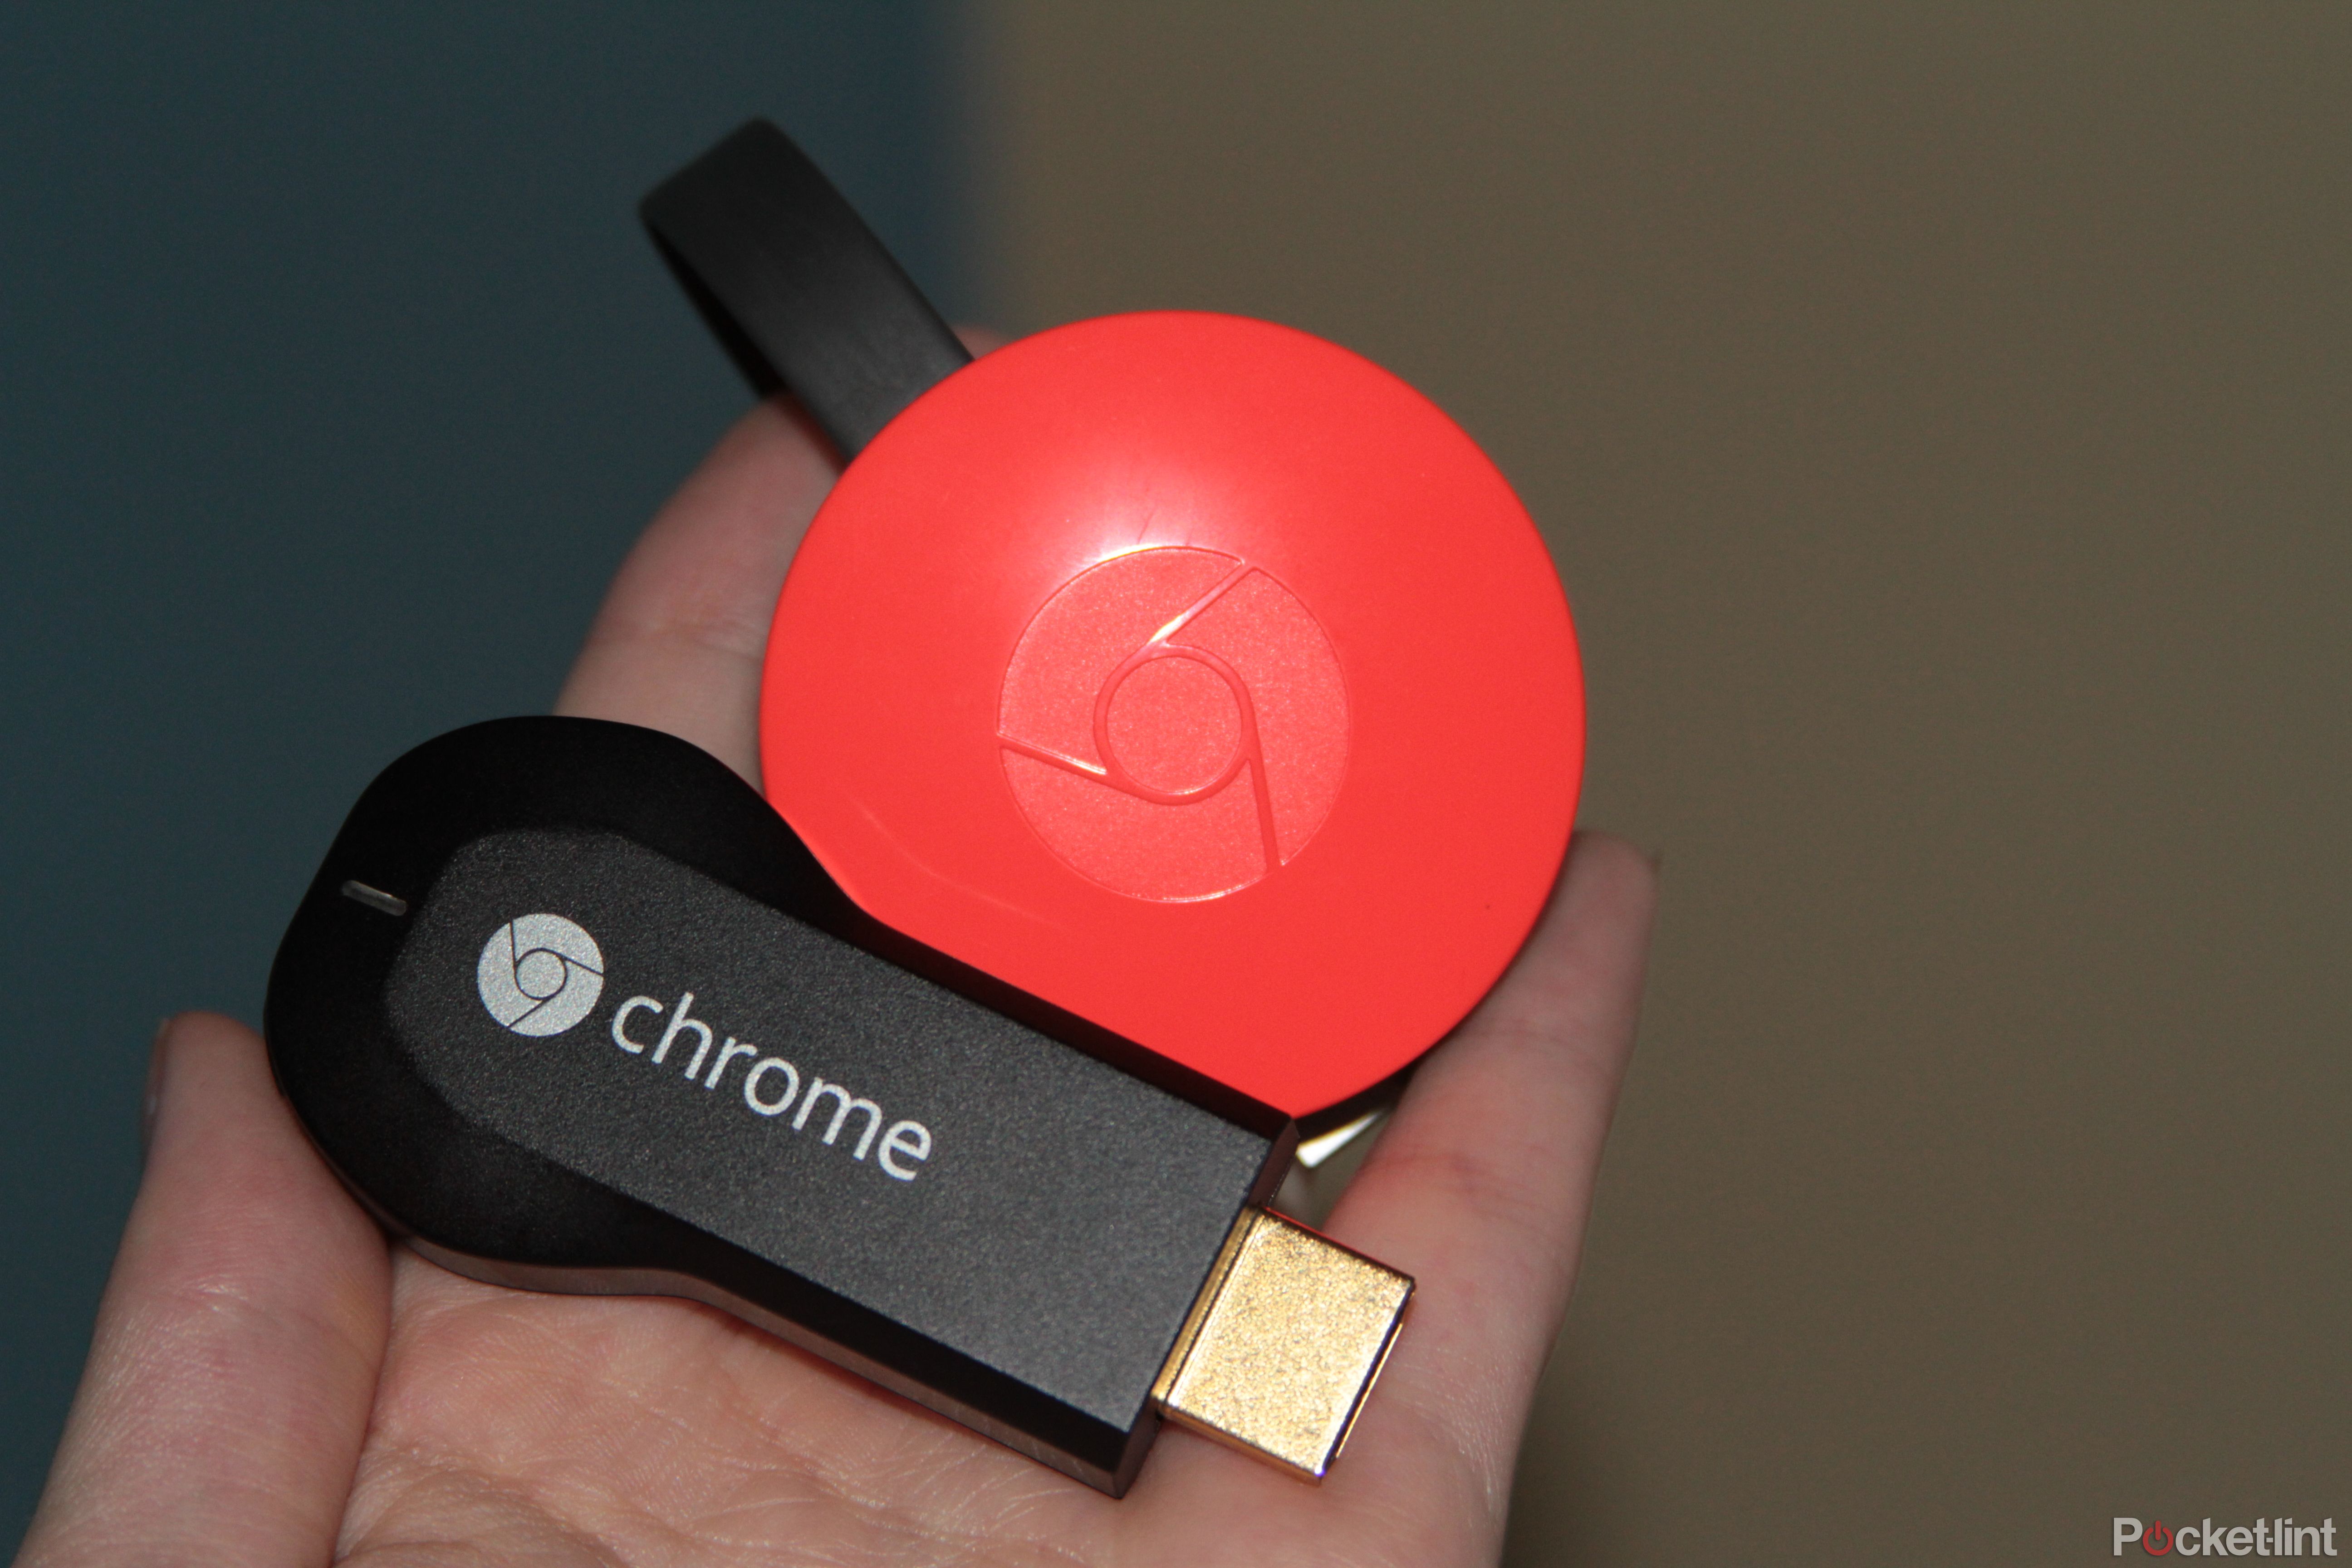 televisions with built in google chromecast likely to arrive this spring image 1